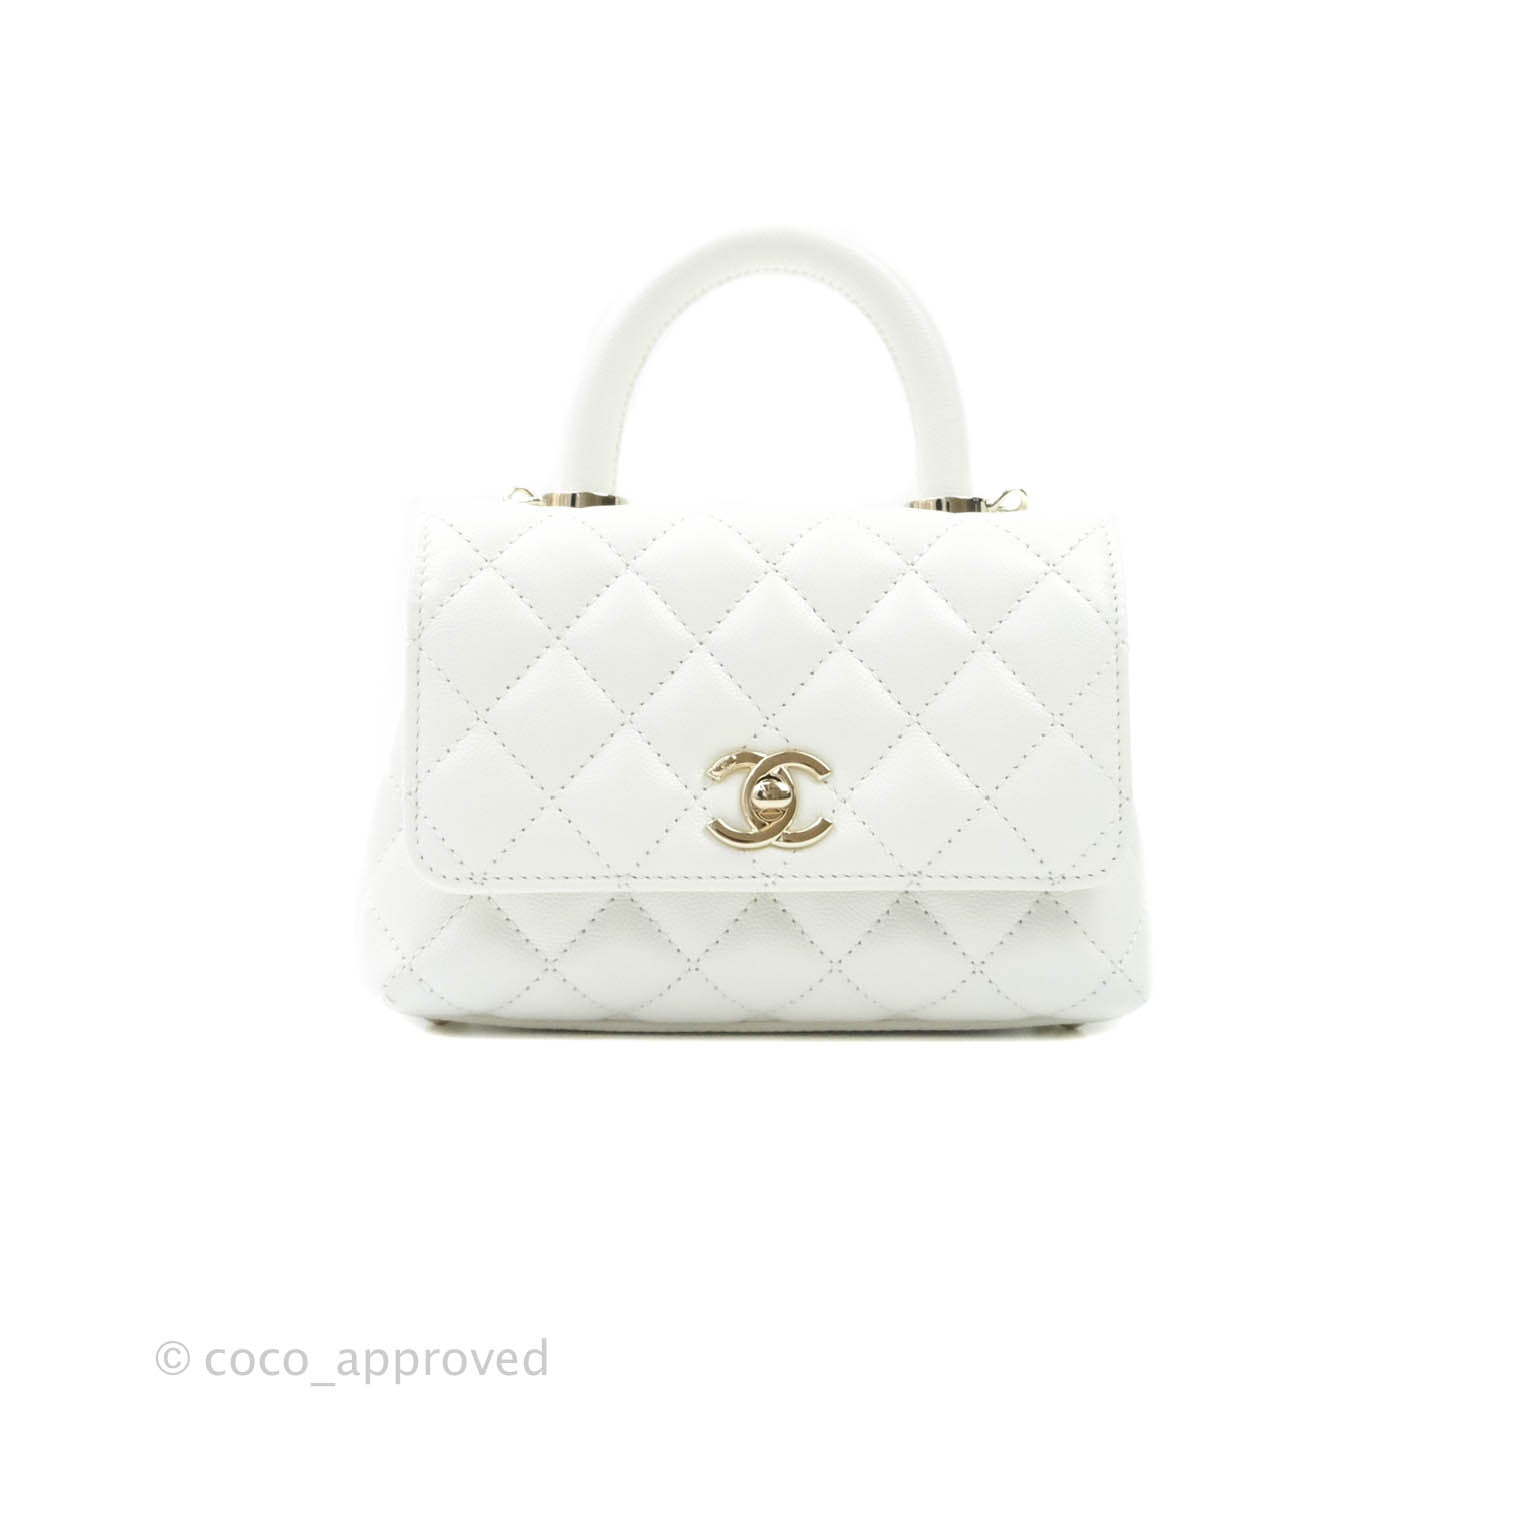 SHOP - CHANEL - Page 23 - VLuxeStyle